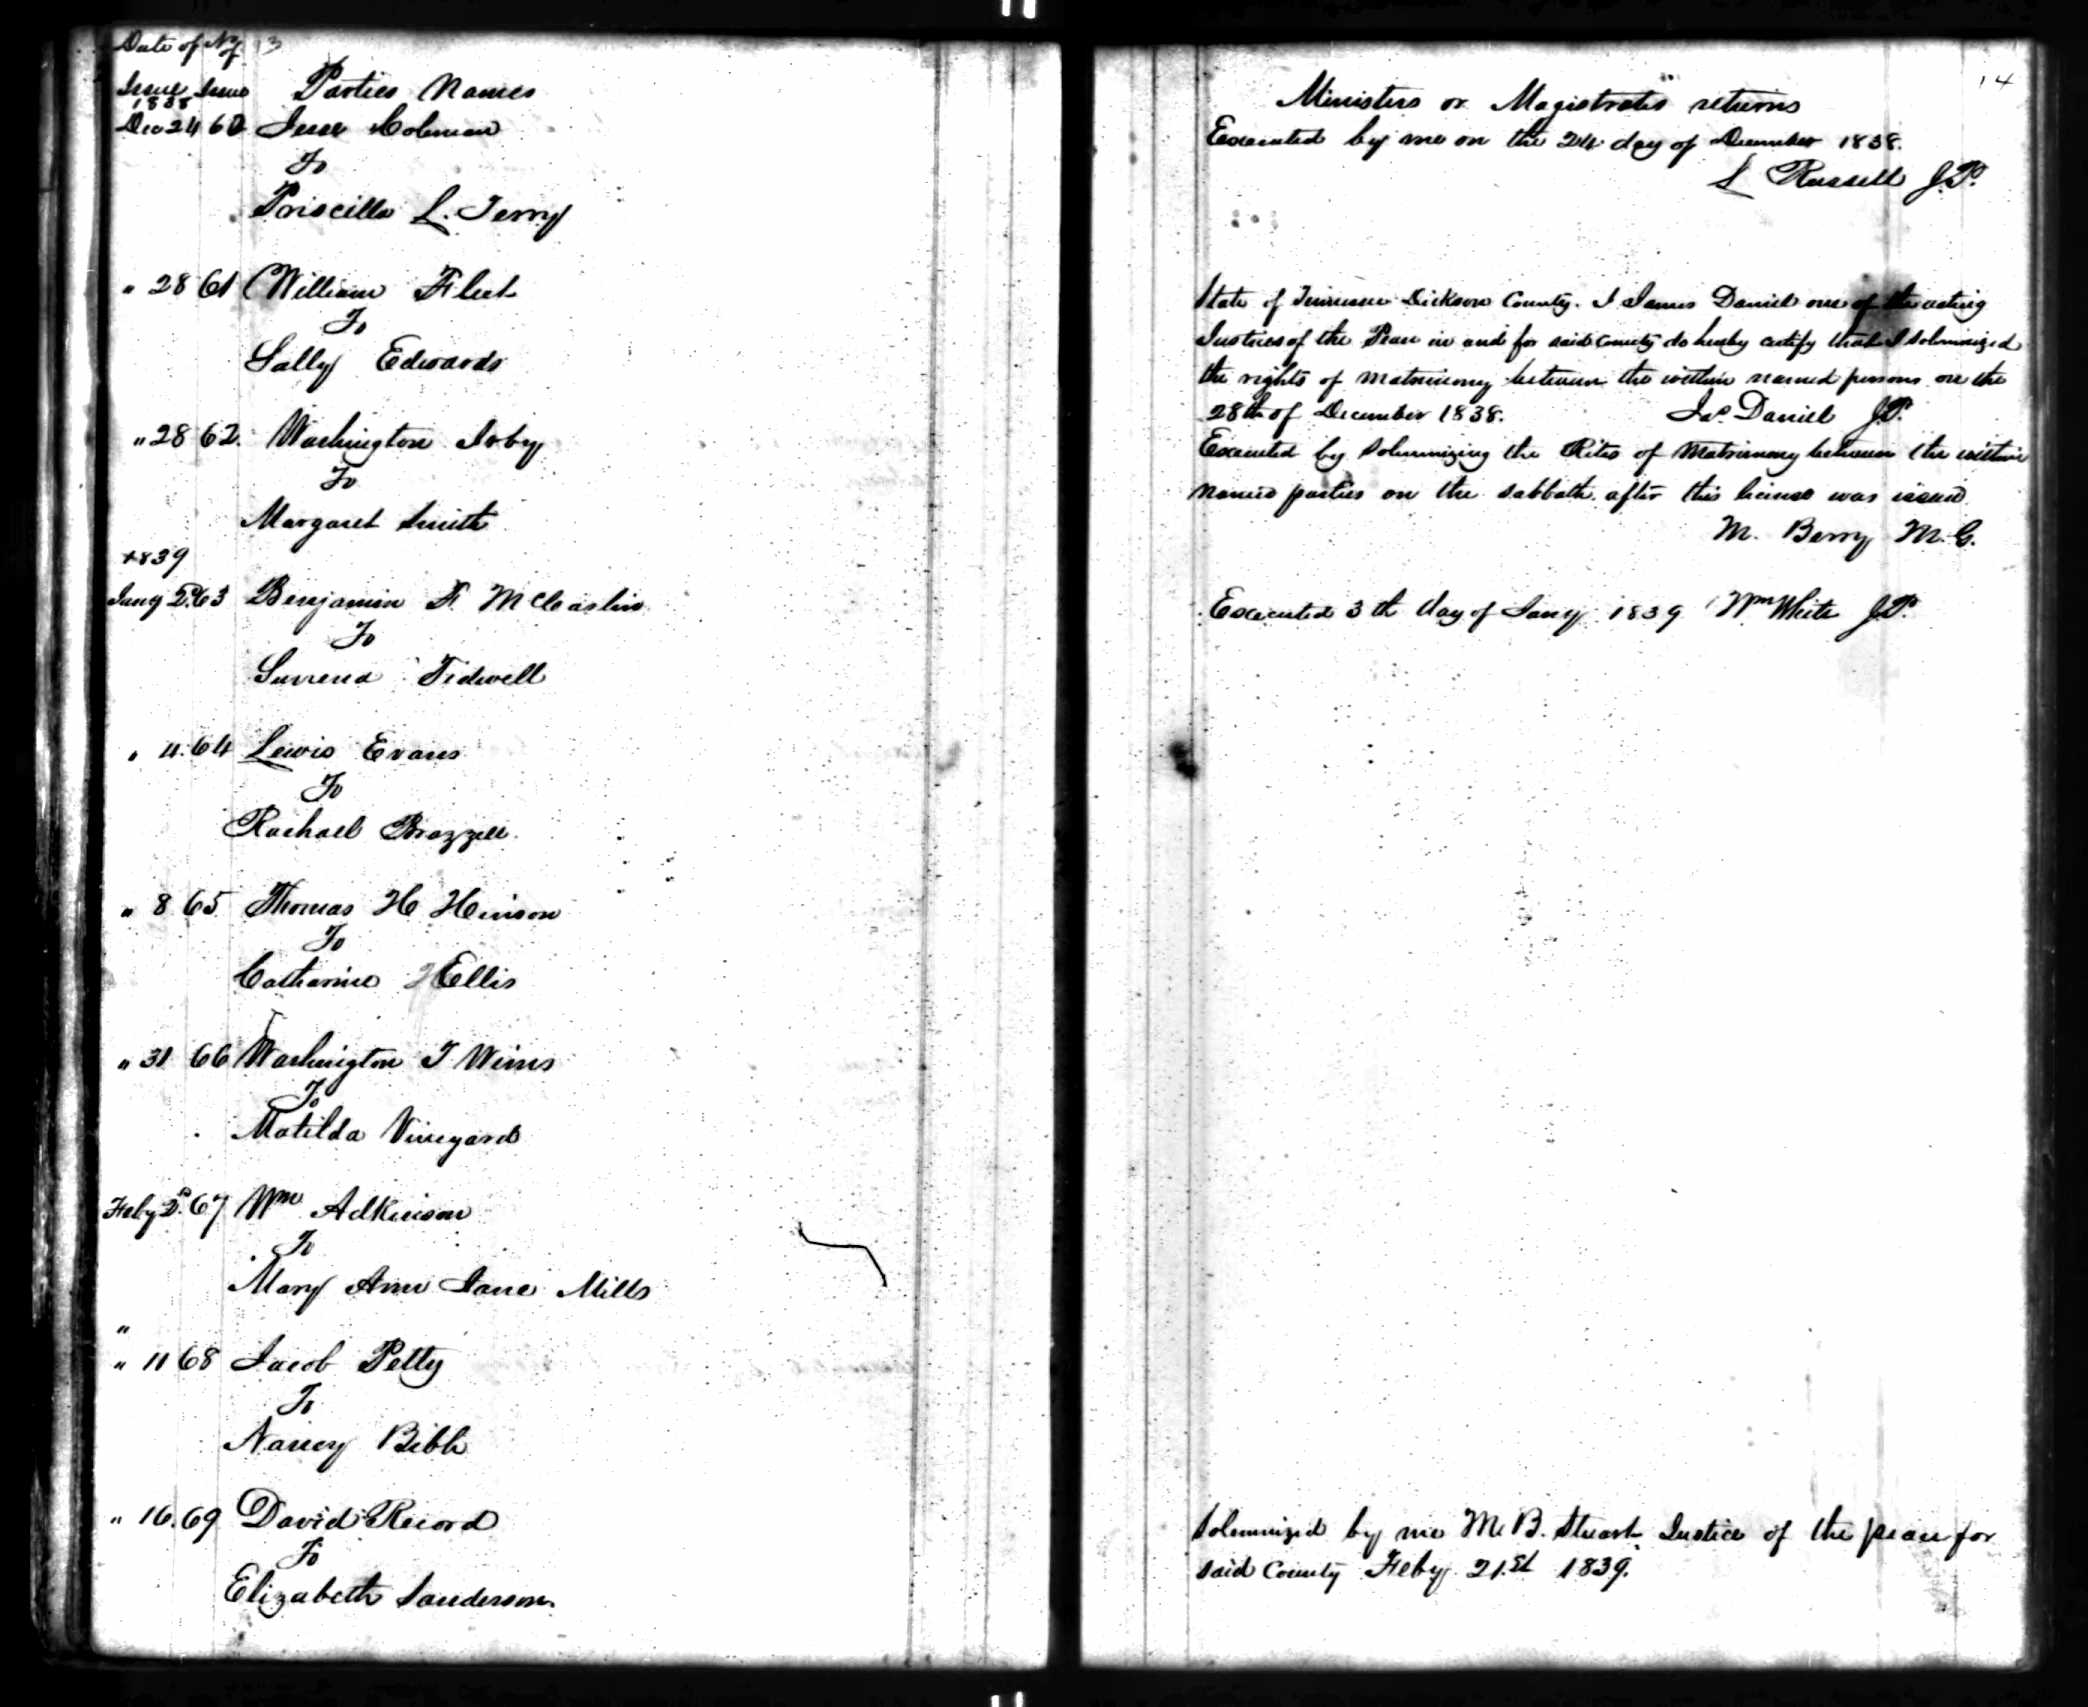 Rachael Brazzell, marriage license with Lewis Evans, issue 4 January 1839, Dickson Co TN. No return.